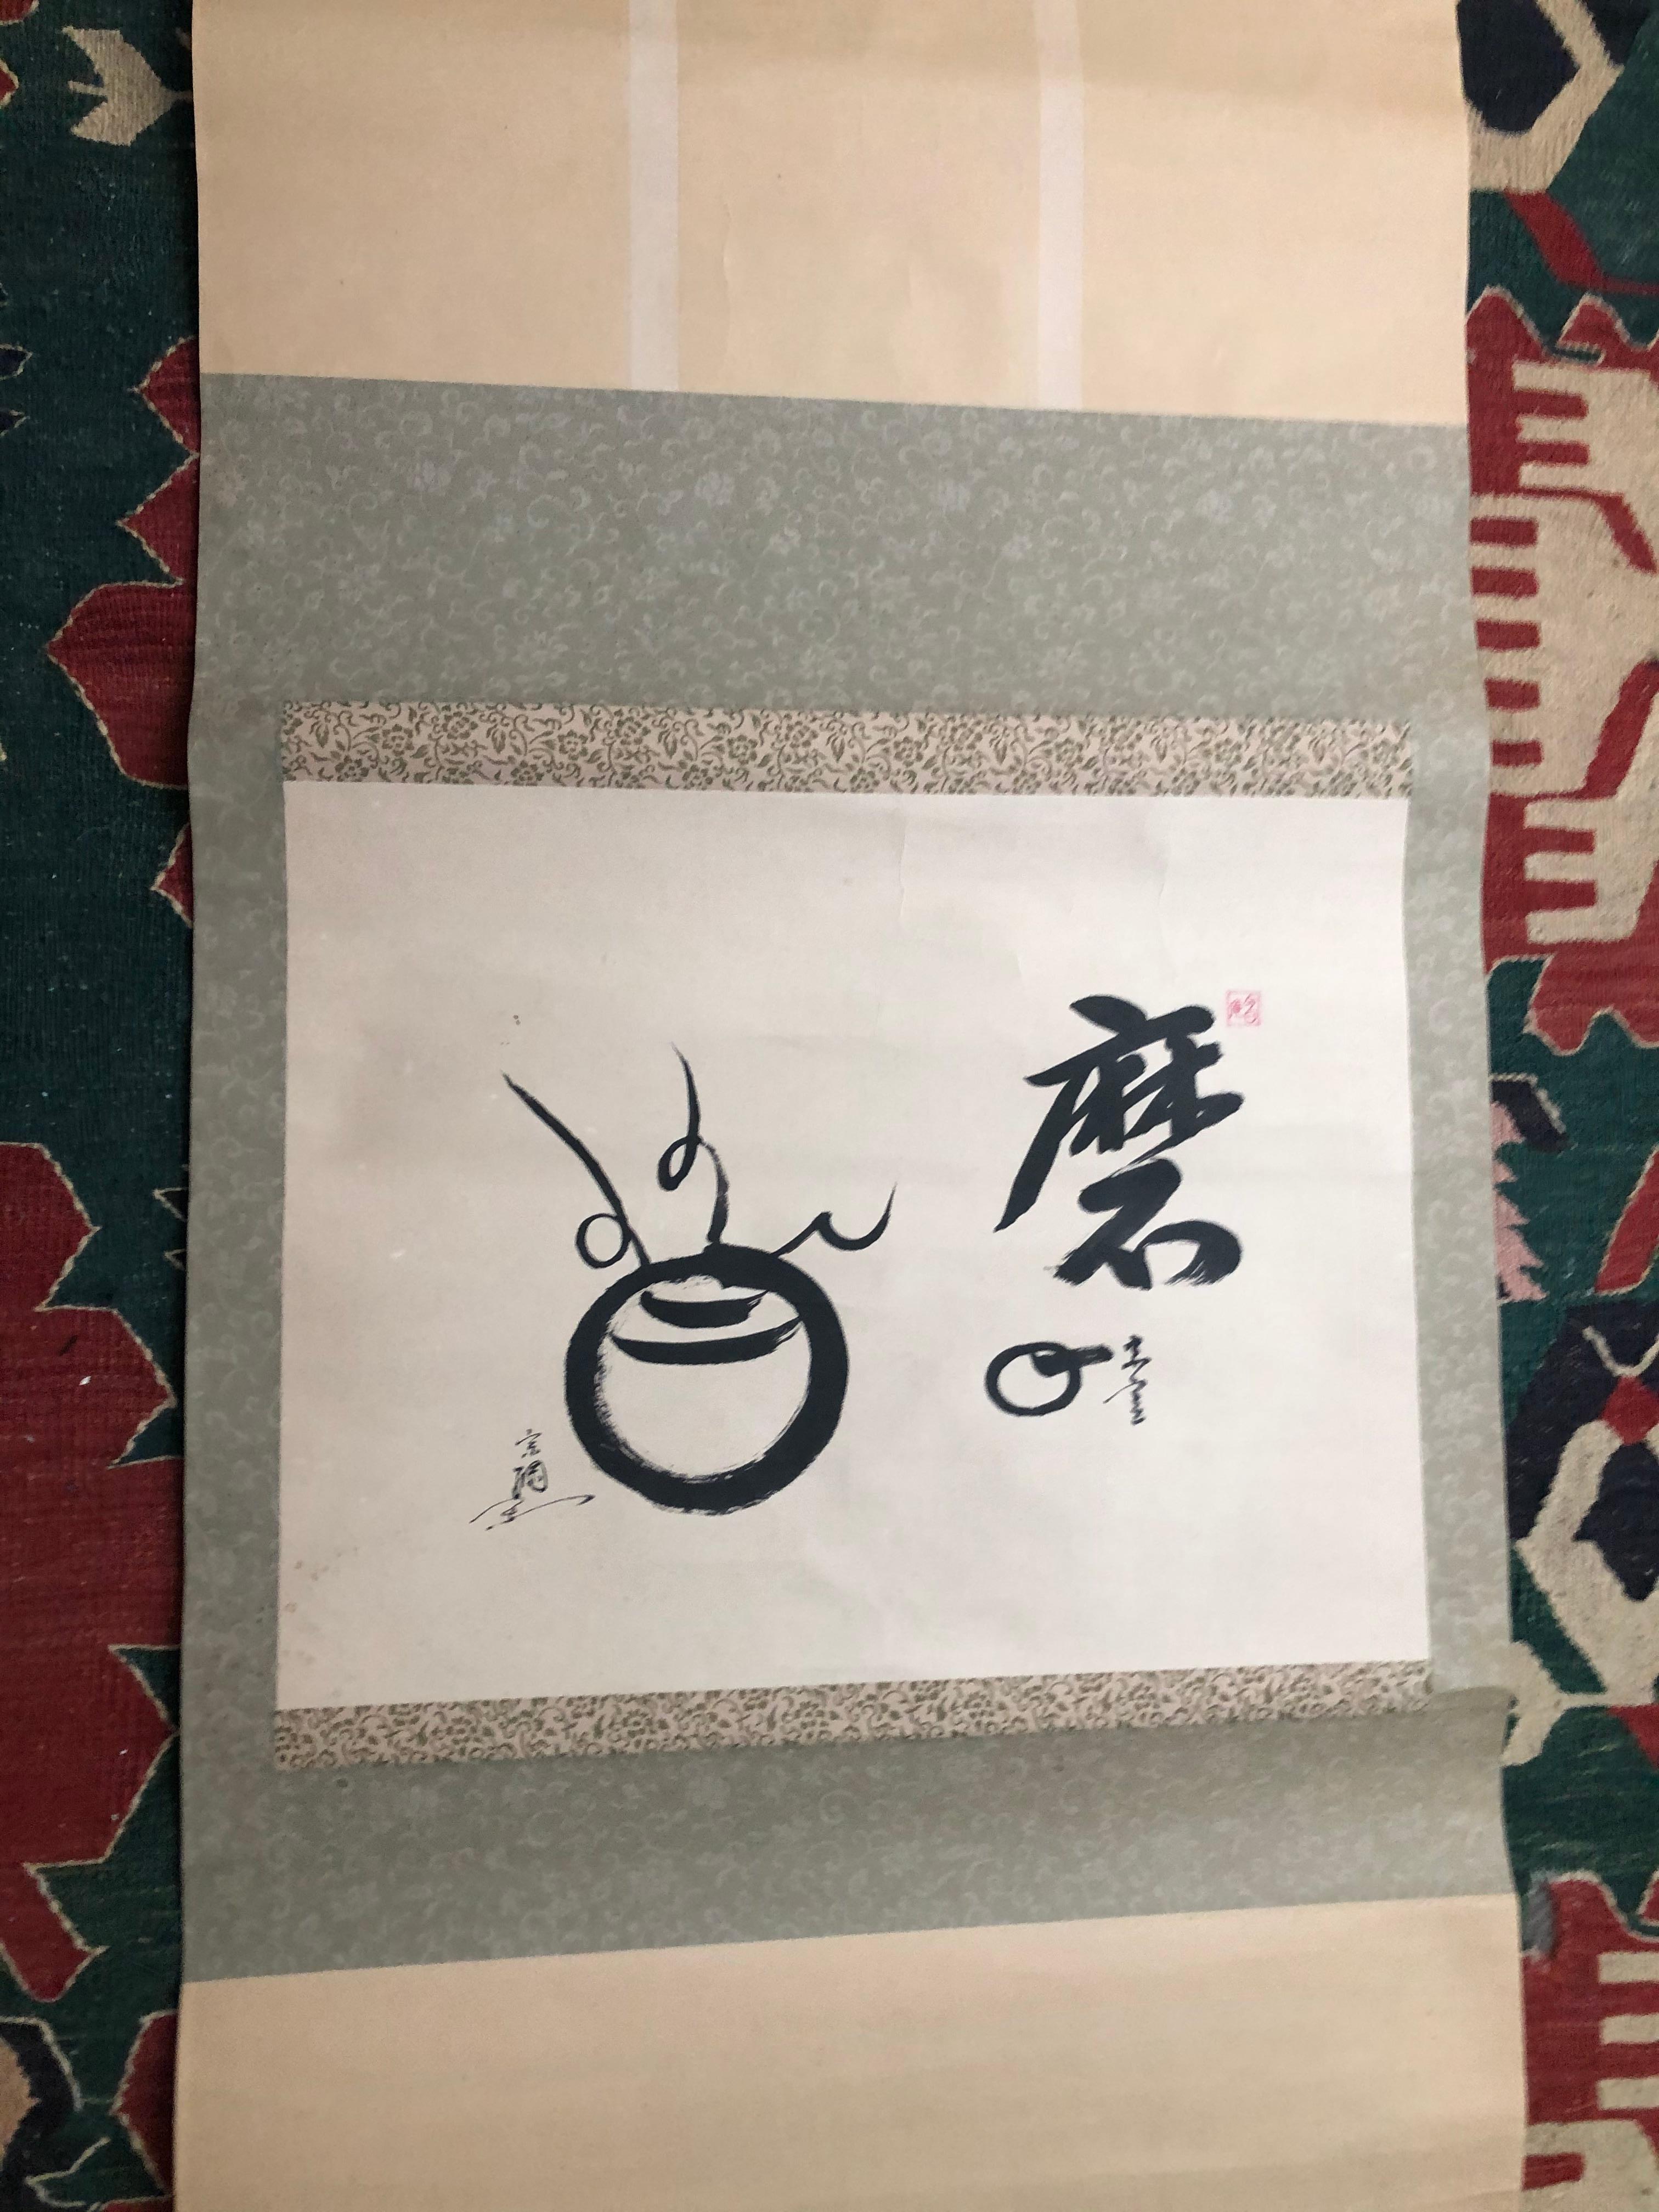 Japan, remarkable HoJu, the wish granting jewel, signed, calligraphy painted on paper.

Dimensions: 26 inches wide and 52.5 inches length.

Zen like but piqued subject matter, this painting is skillfully and tastefully rendered in watercolor and